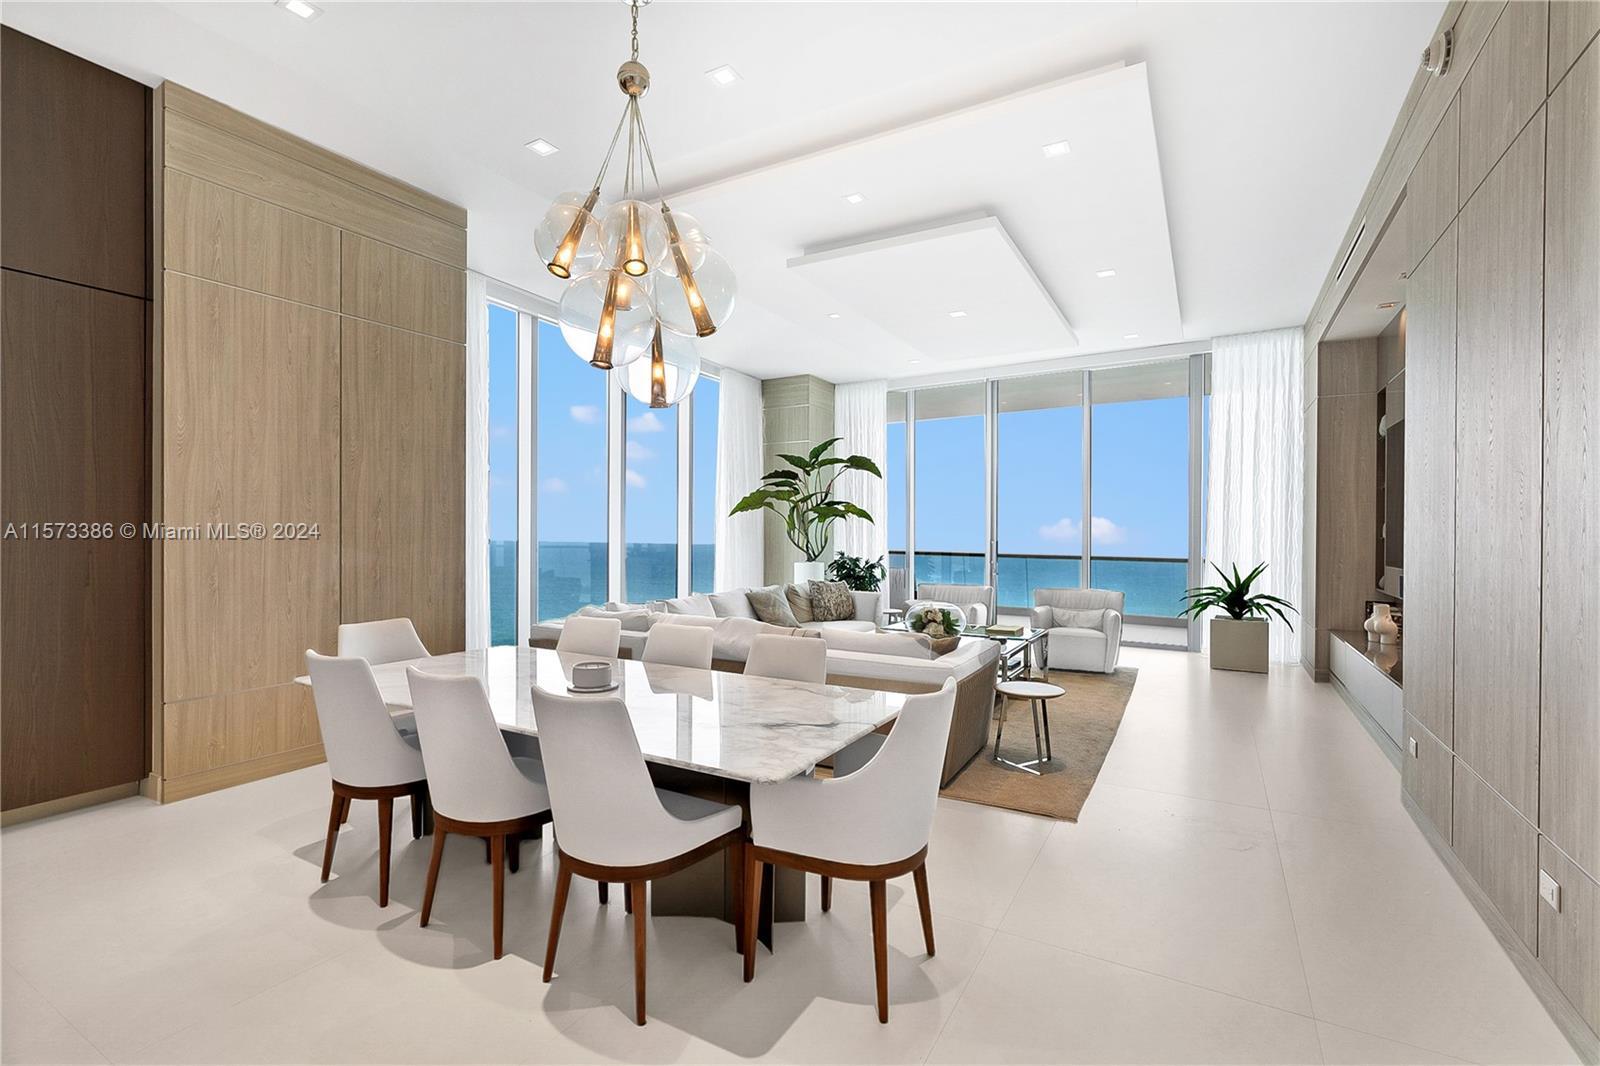 Breathtaking High Floor Residence that was finished and furnished by a renowned design firm with no 